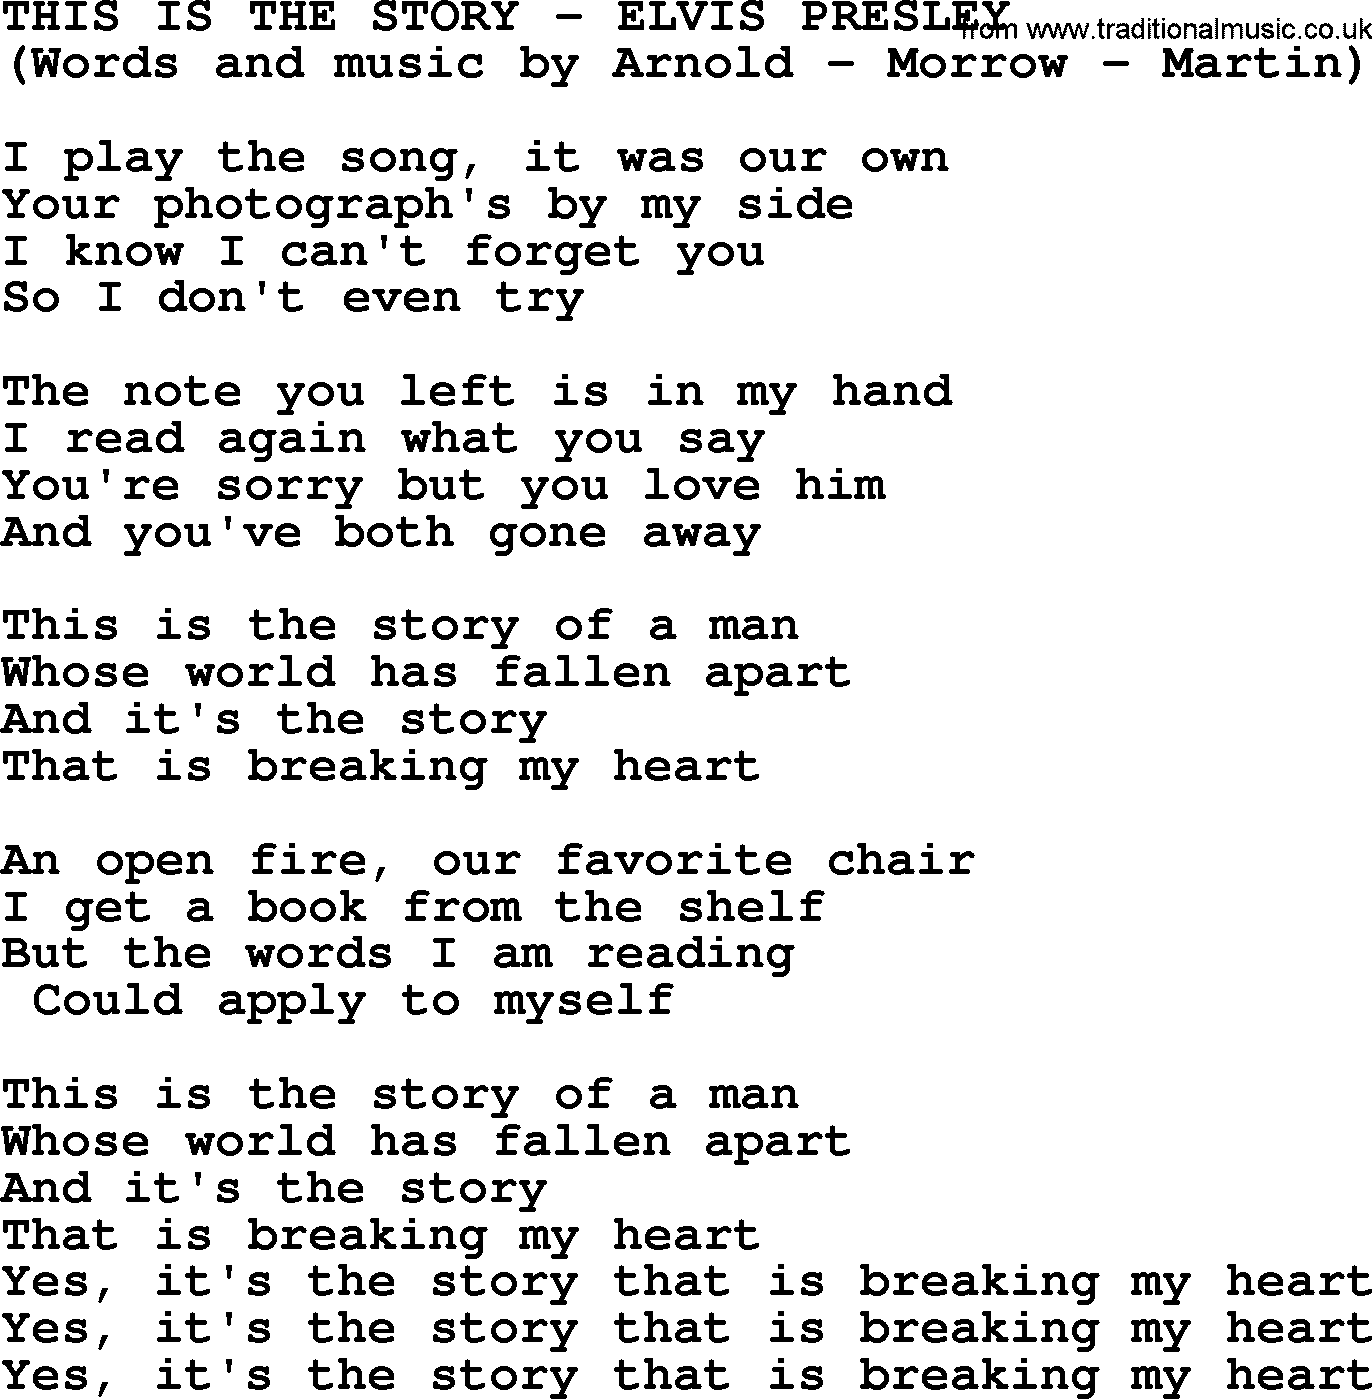 Elvis Presley song: This Is The Story lyrics